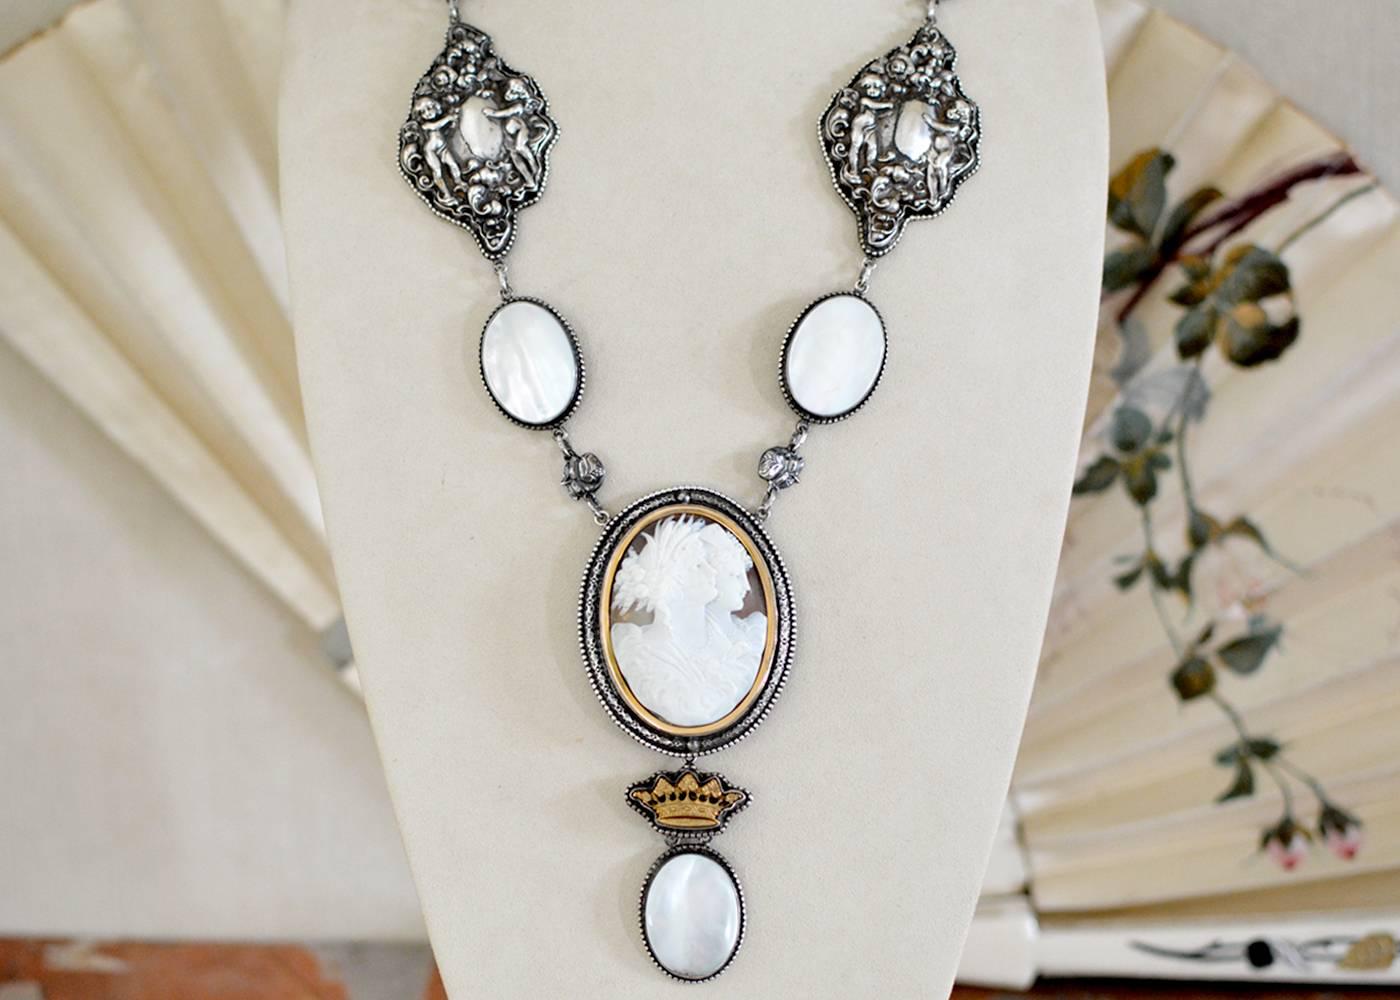 This one of a kind necklace features a fine antique Georgian cameo depicting two Goddesses in 14 karat gold mounted within an elaborately engraved double frame with bronze crown drop connects to a generous mother-of-pearl infused chain. Consisting